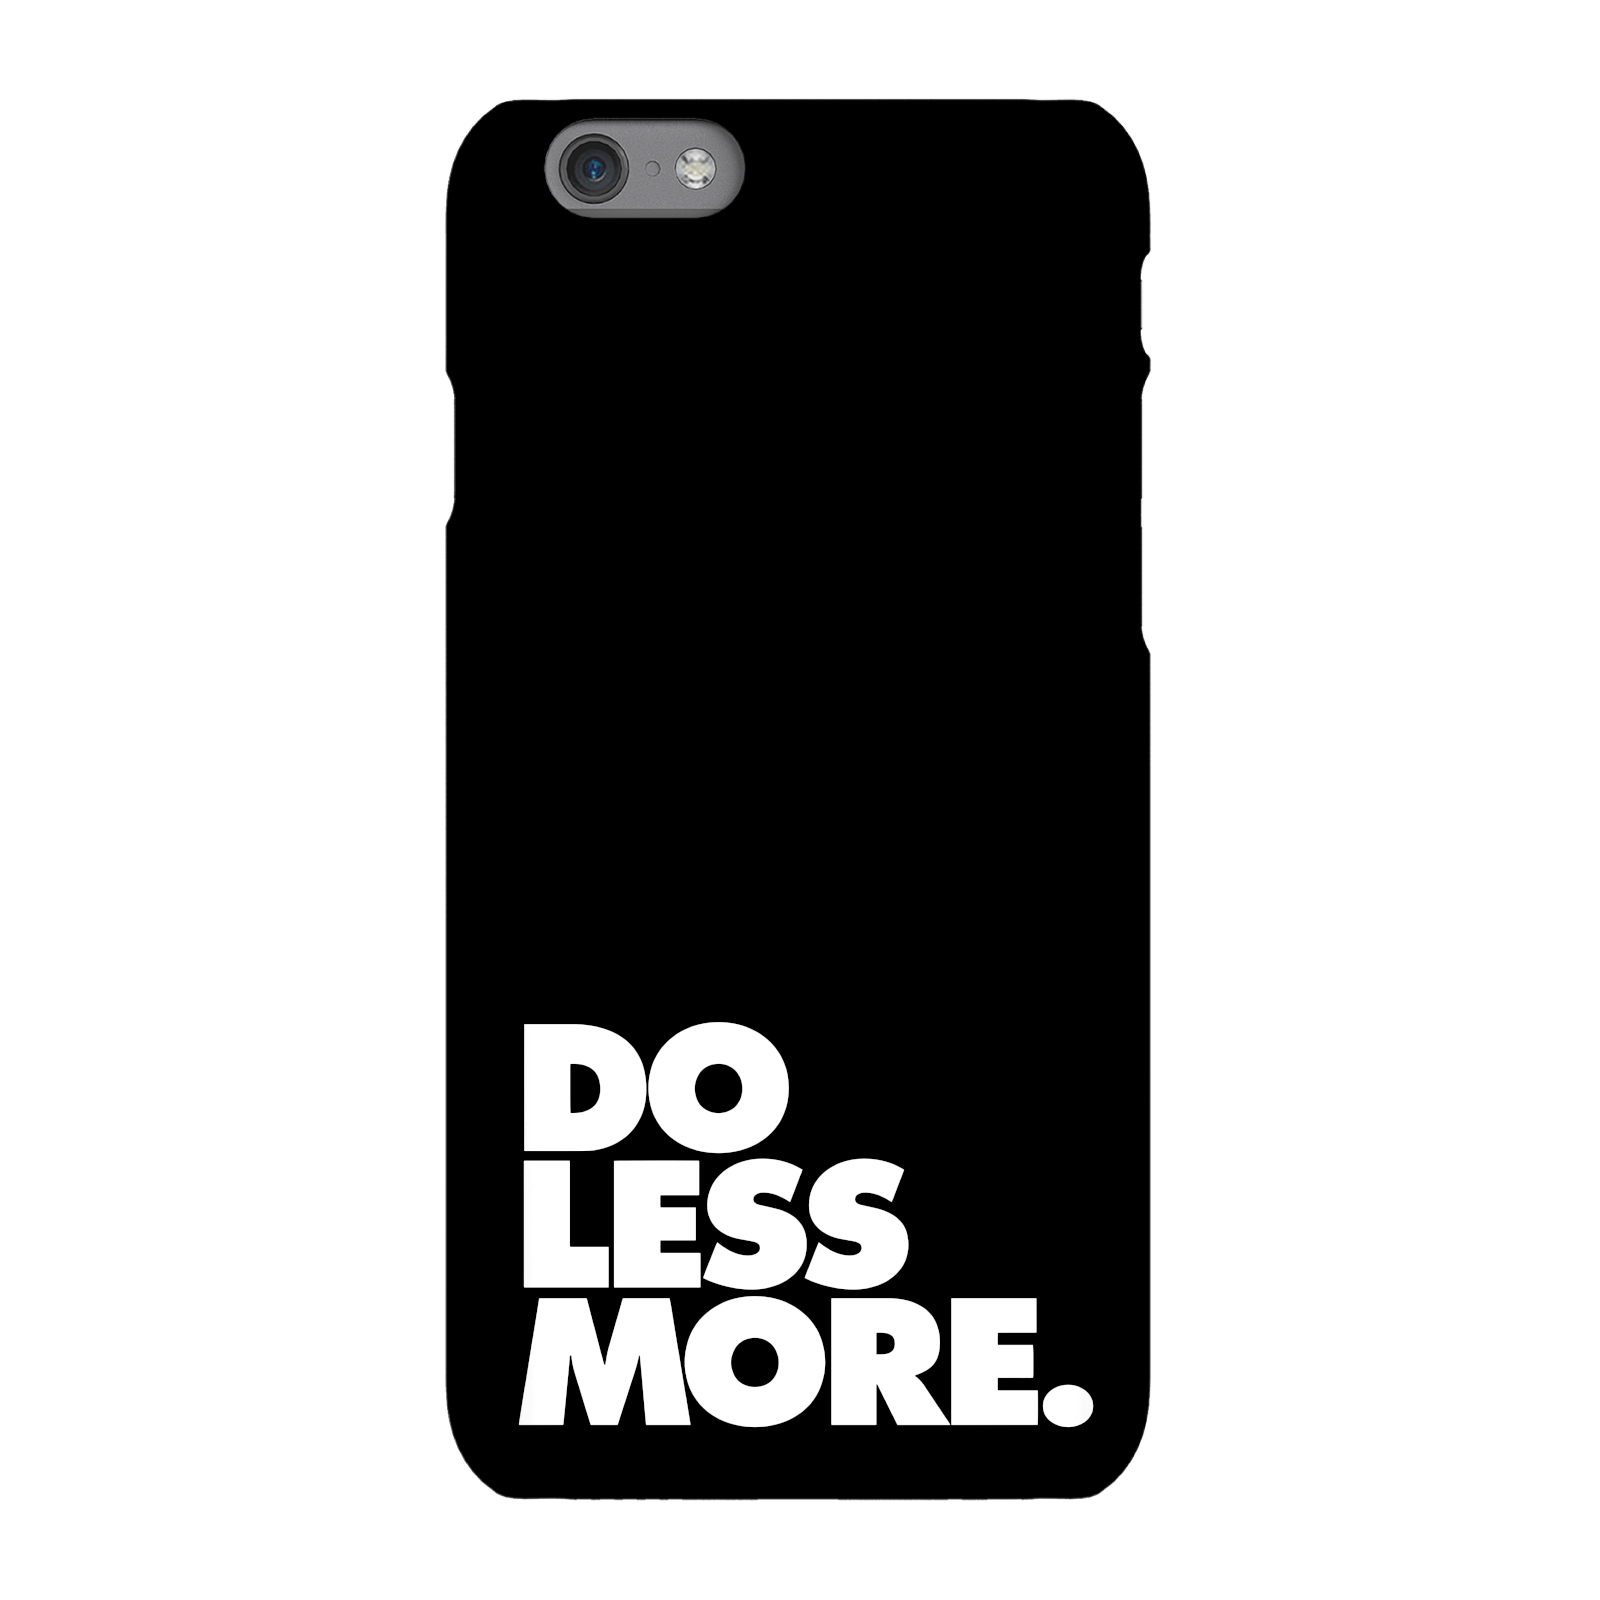 The Motivated Type Do Less More Phone Case for iPhone and Android - iPhone 5C - Snap Case - Matte